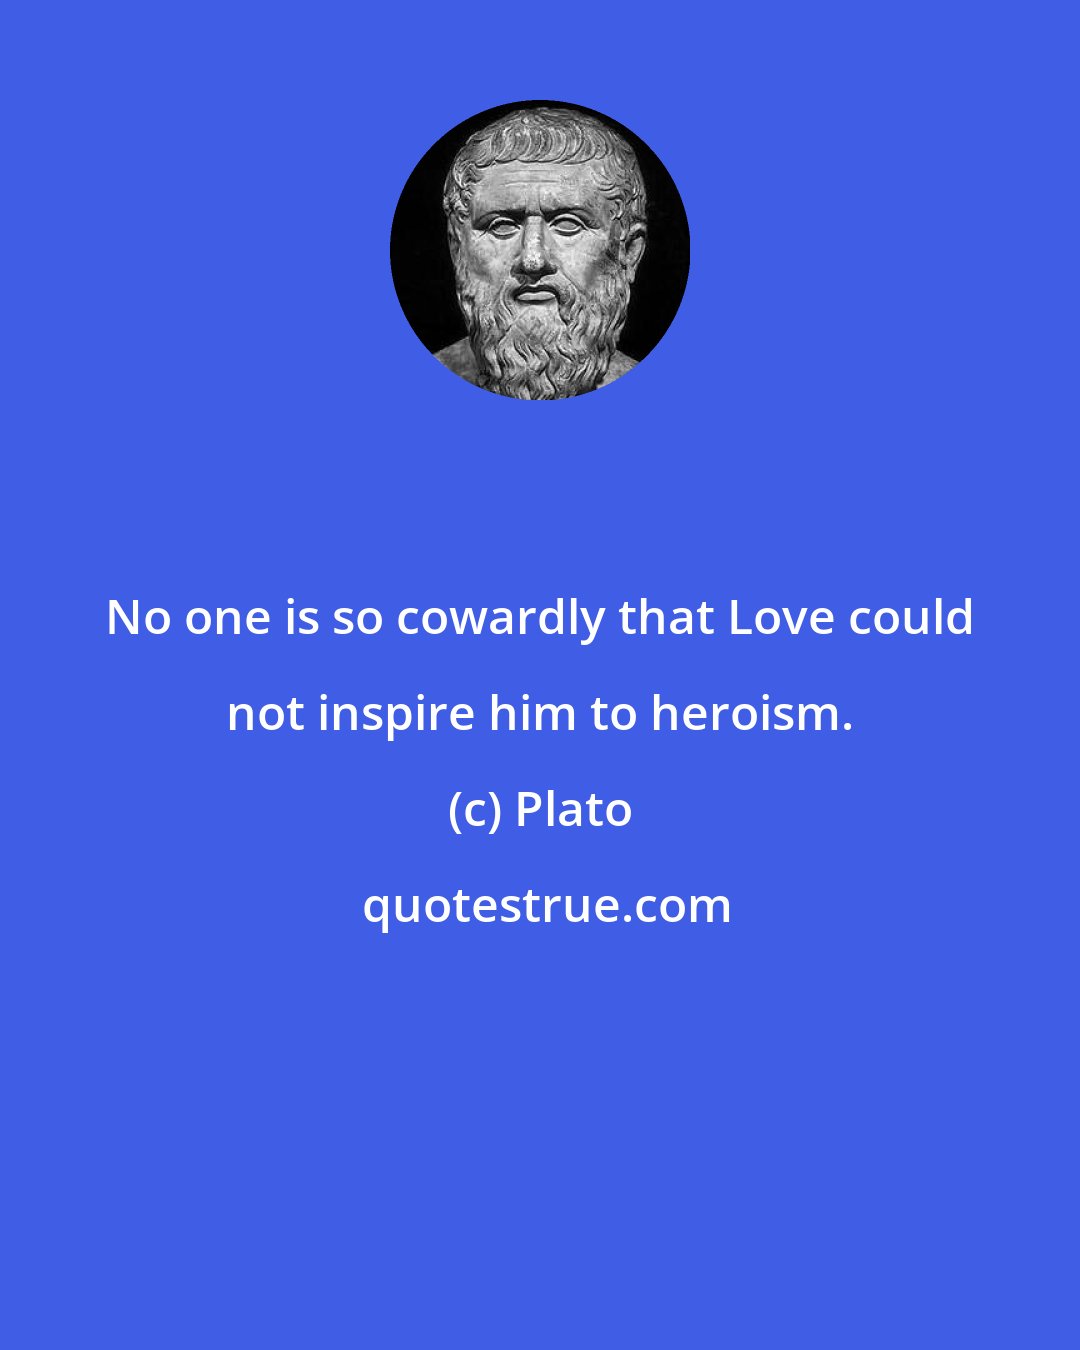 Plato: No one is so cowardly that Love could not inspire him to heroism.